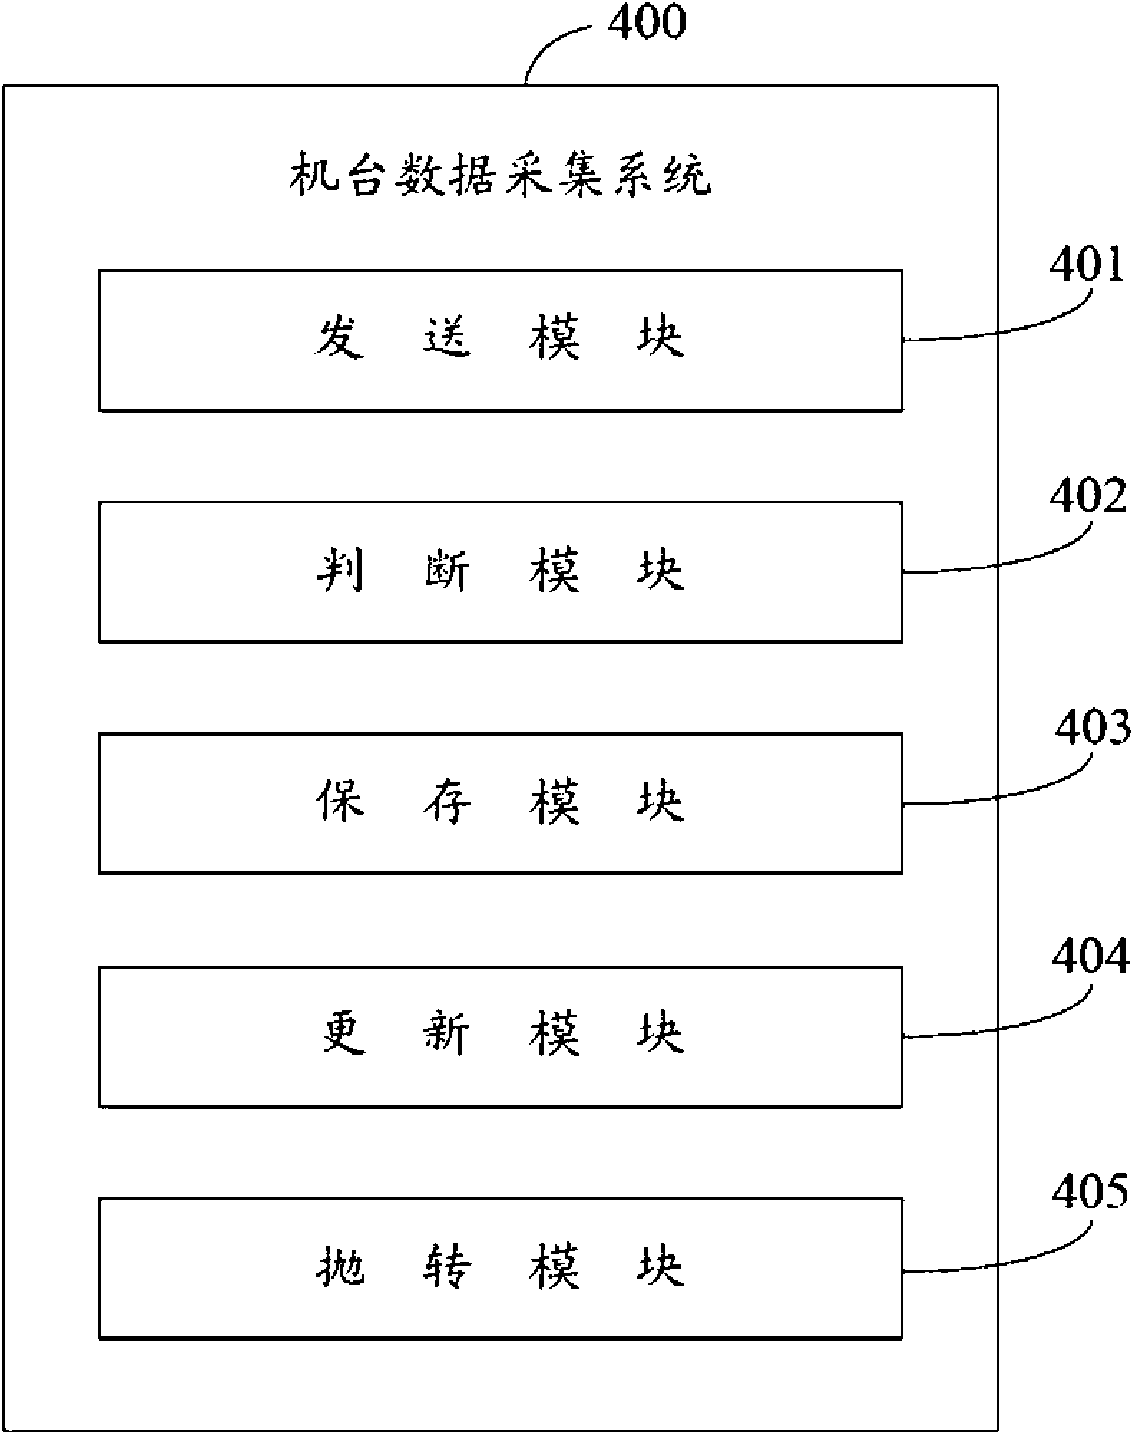 Machine data acquisition system and method